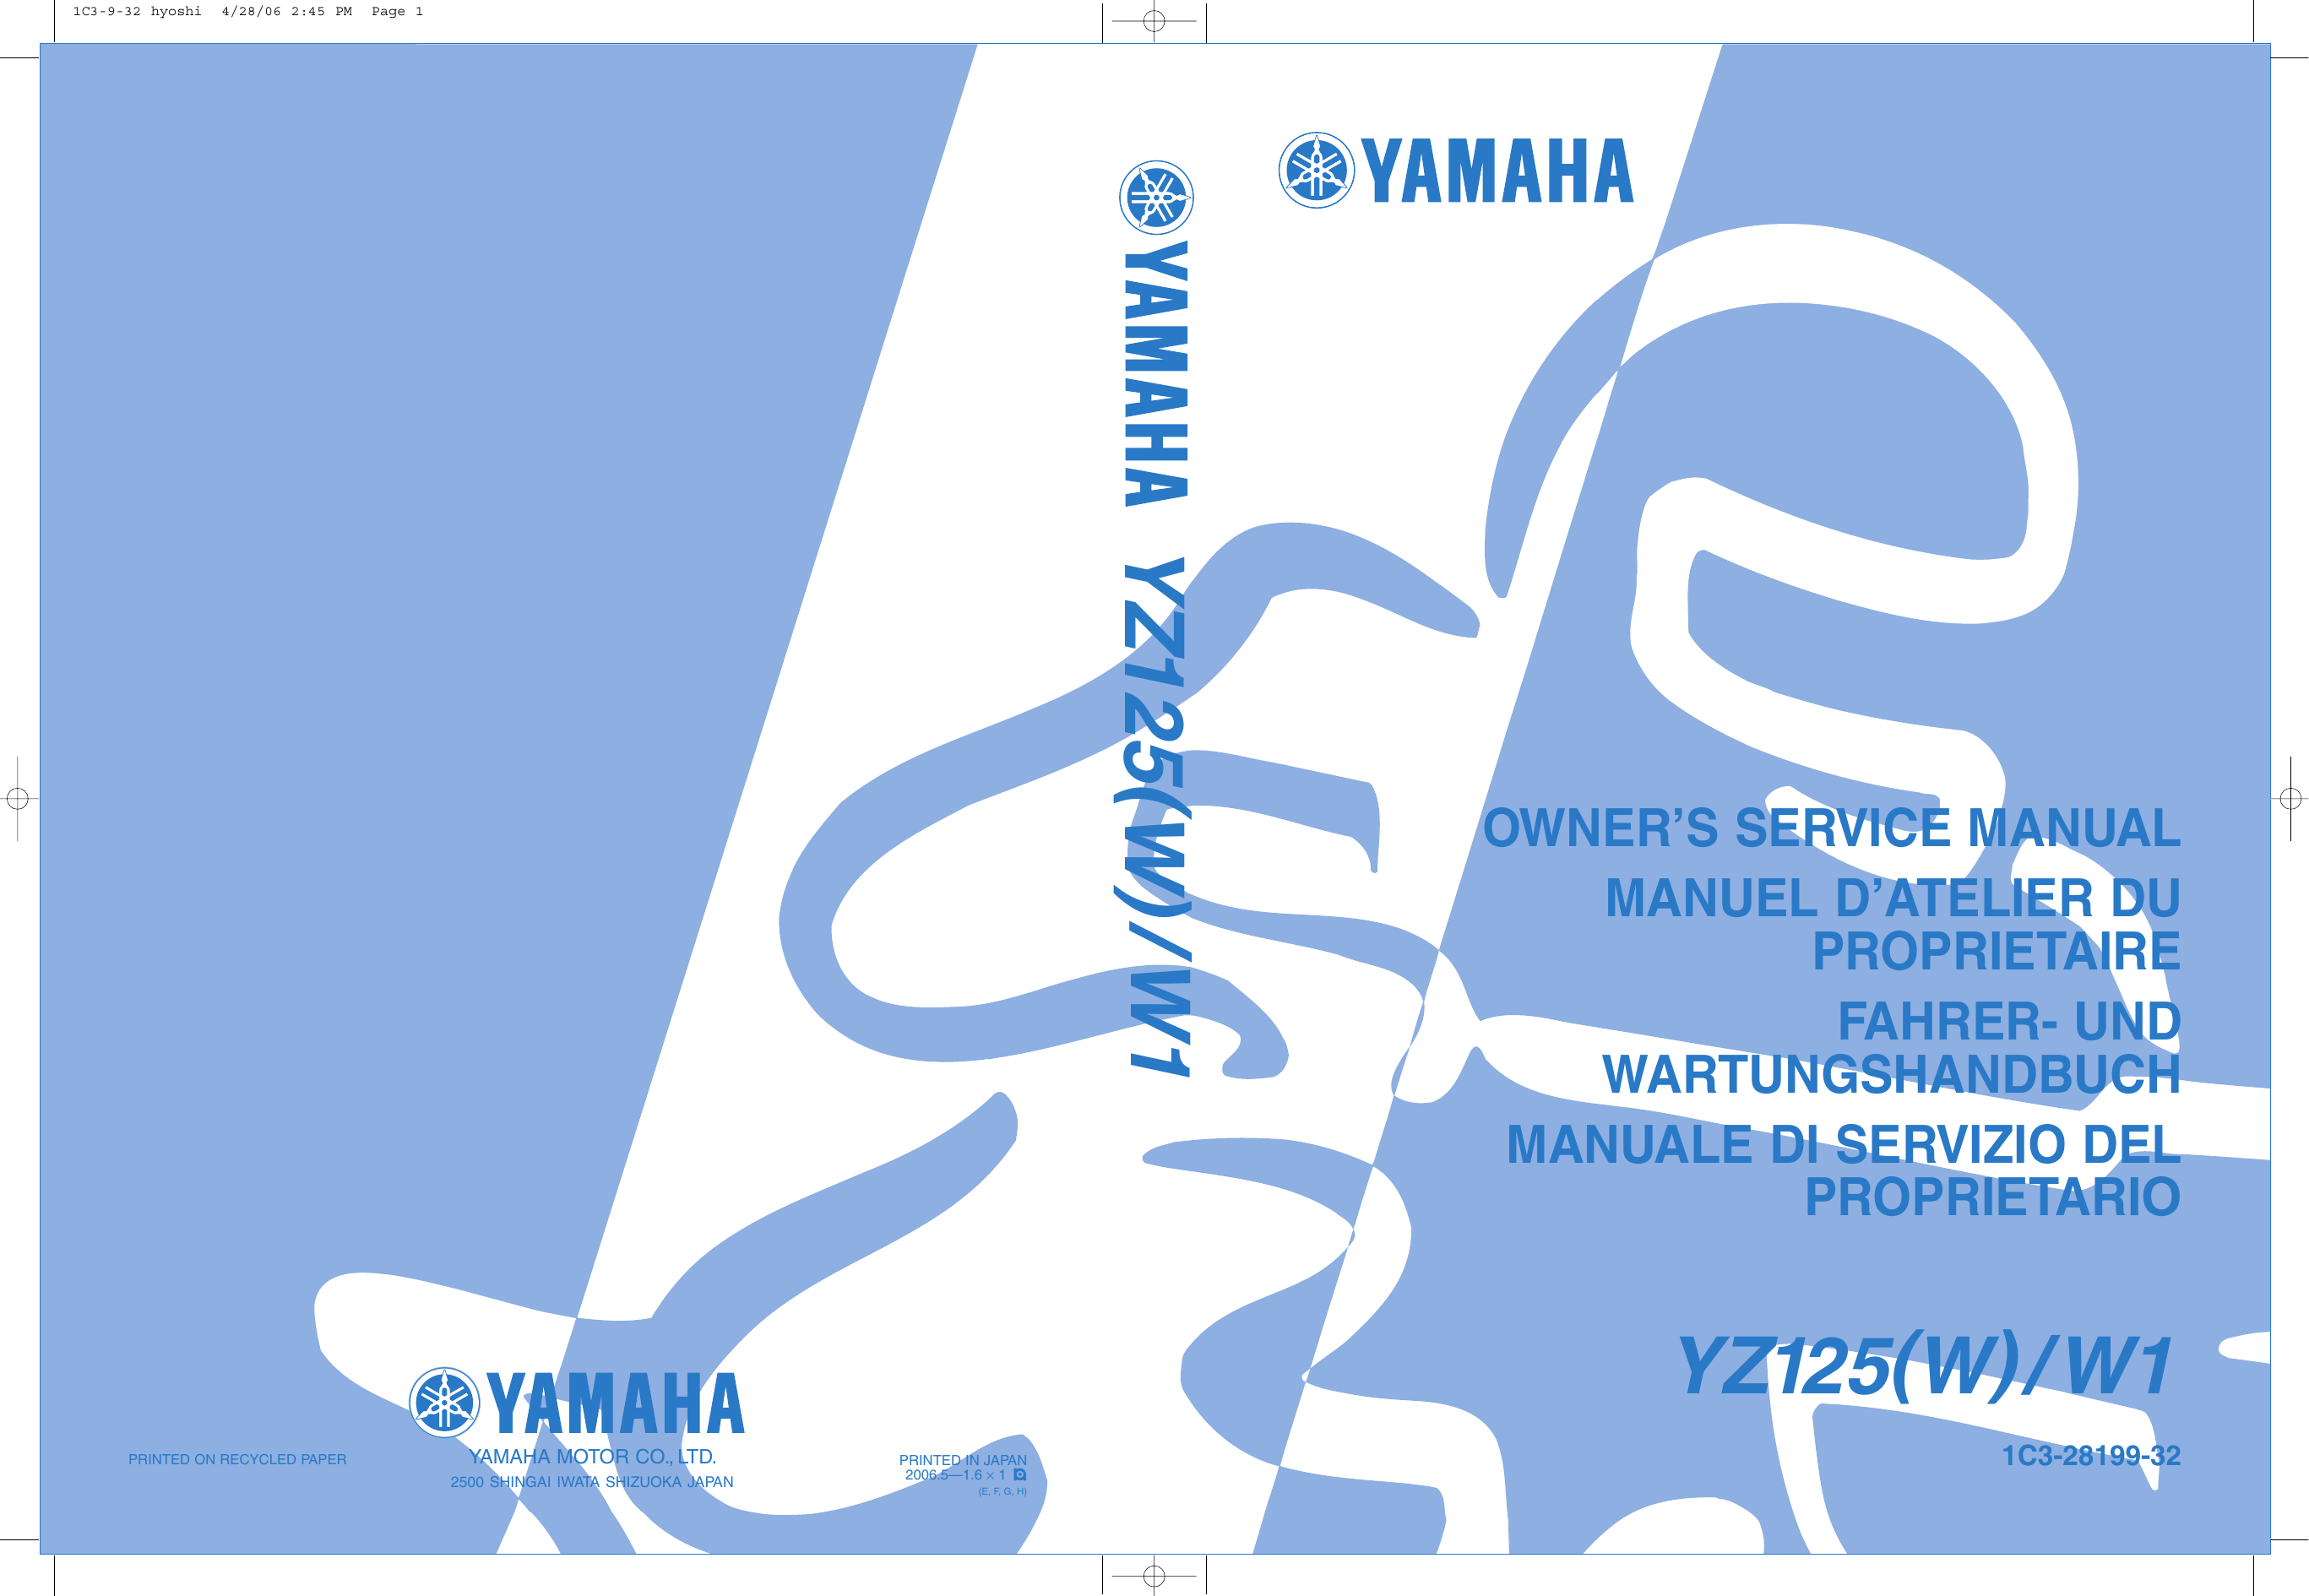 2007 Yamaha YZ125(W)/W1 owners service manual Preview image 1